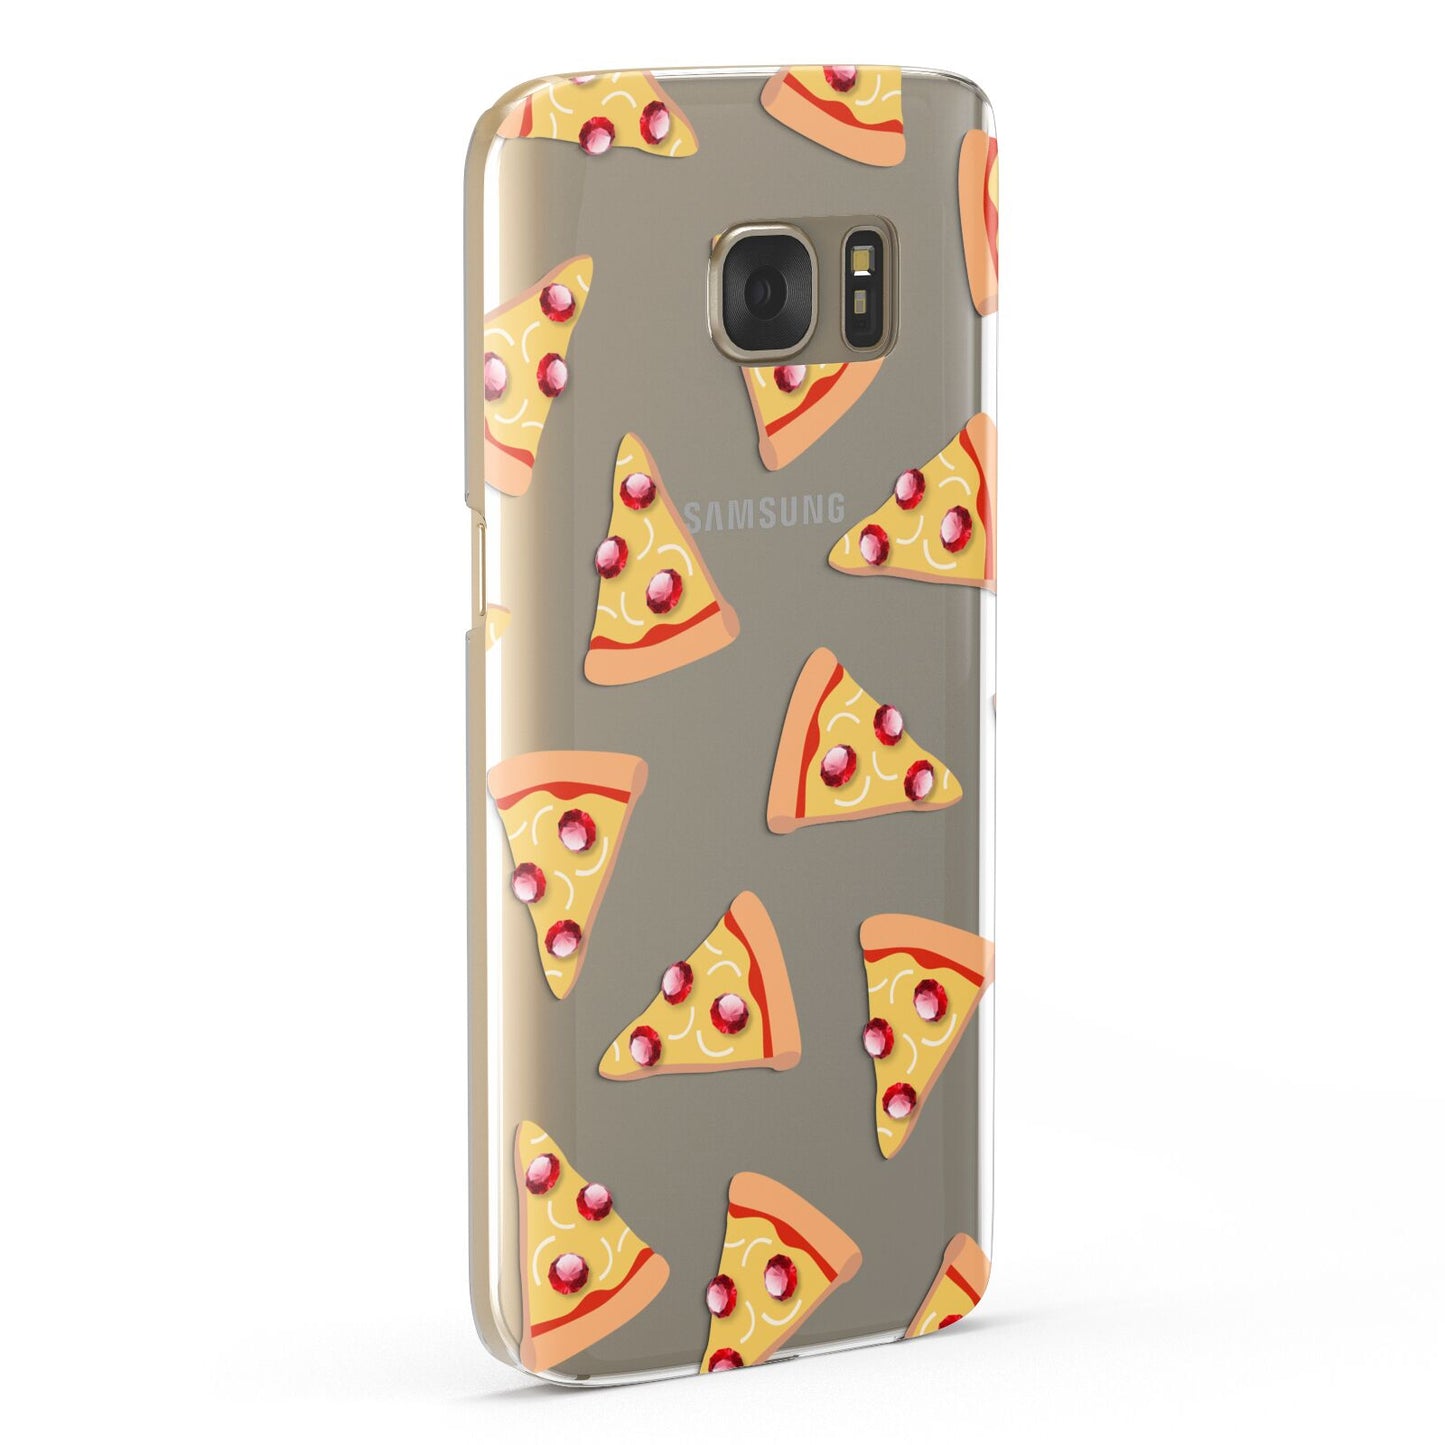 Rubies on Cartoon Pizza Slices Samsung Galaxy Case Fourty Five Degrees